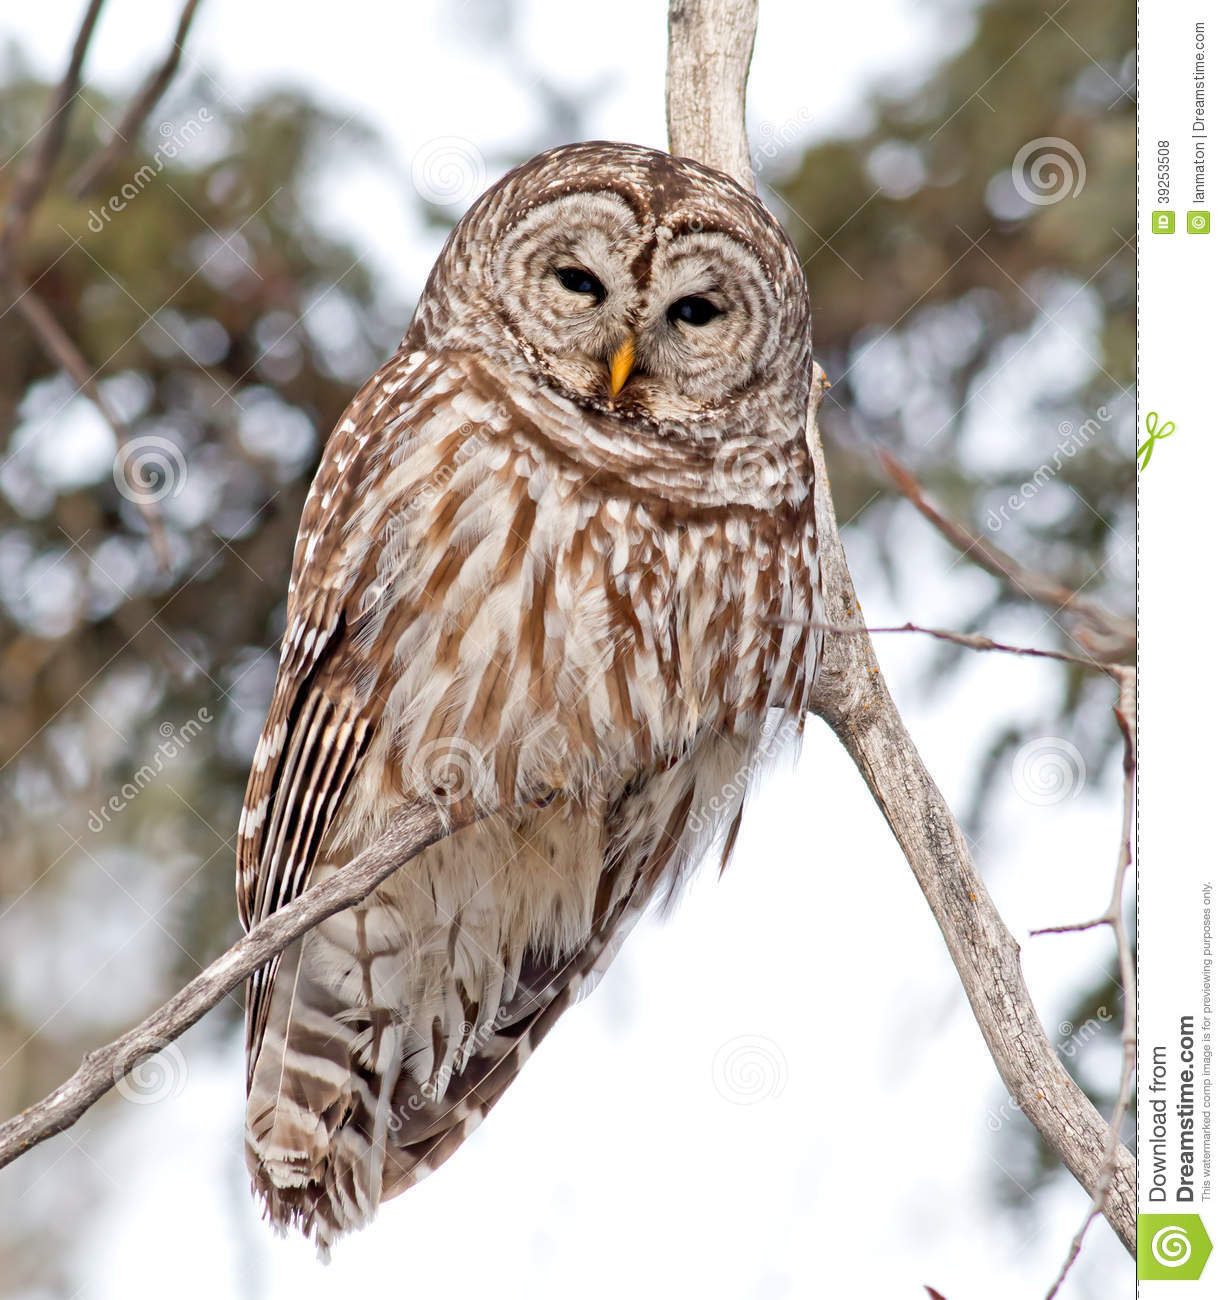 Barred Owl clipart #14, Download drawings